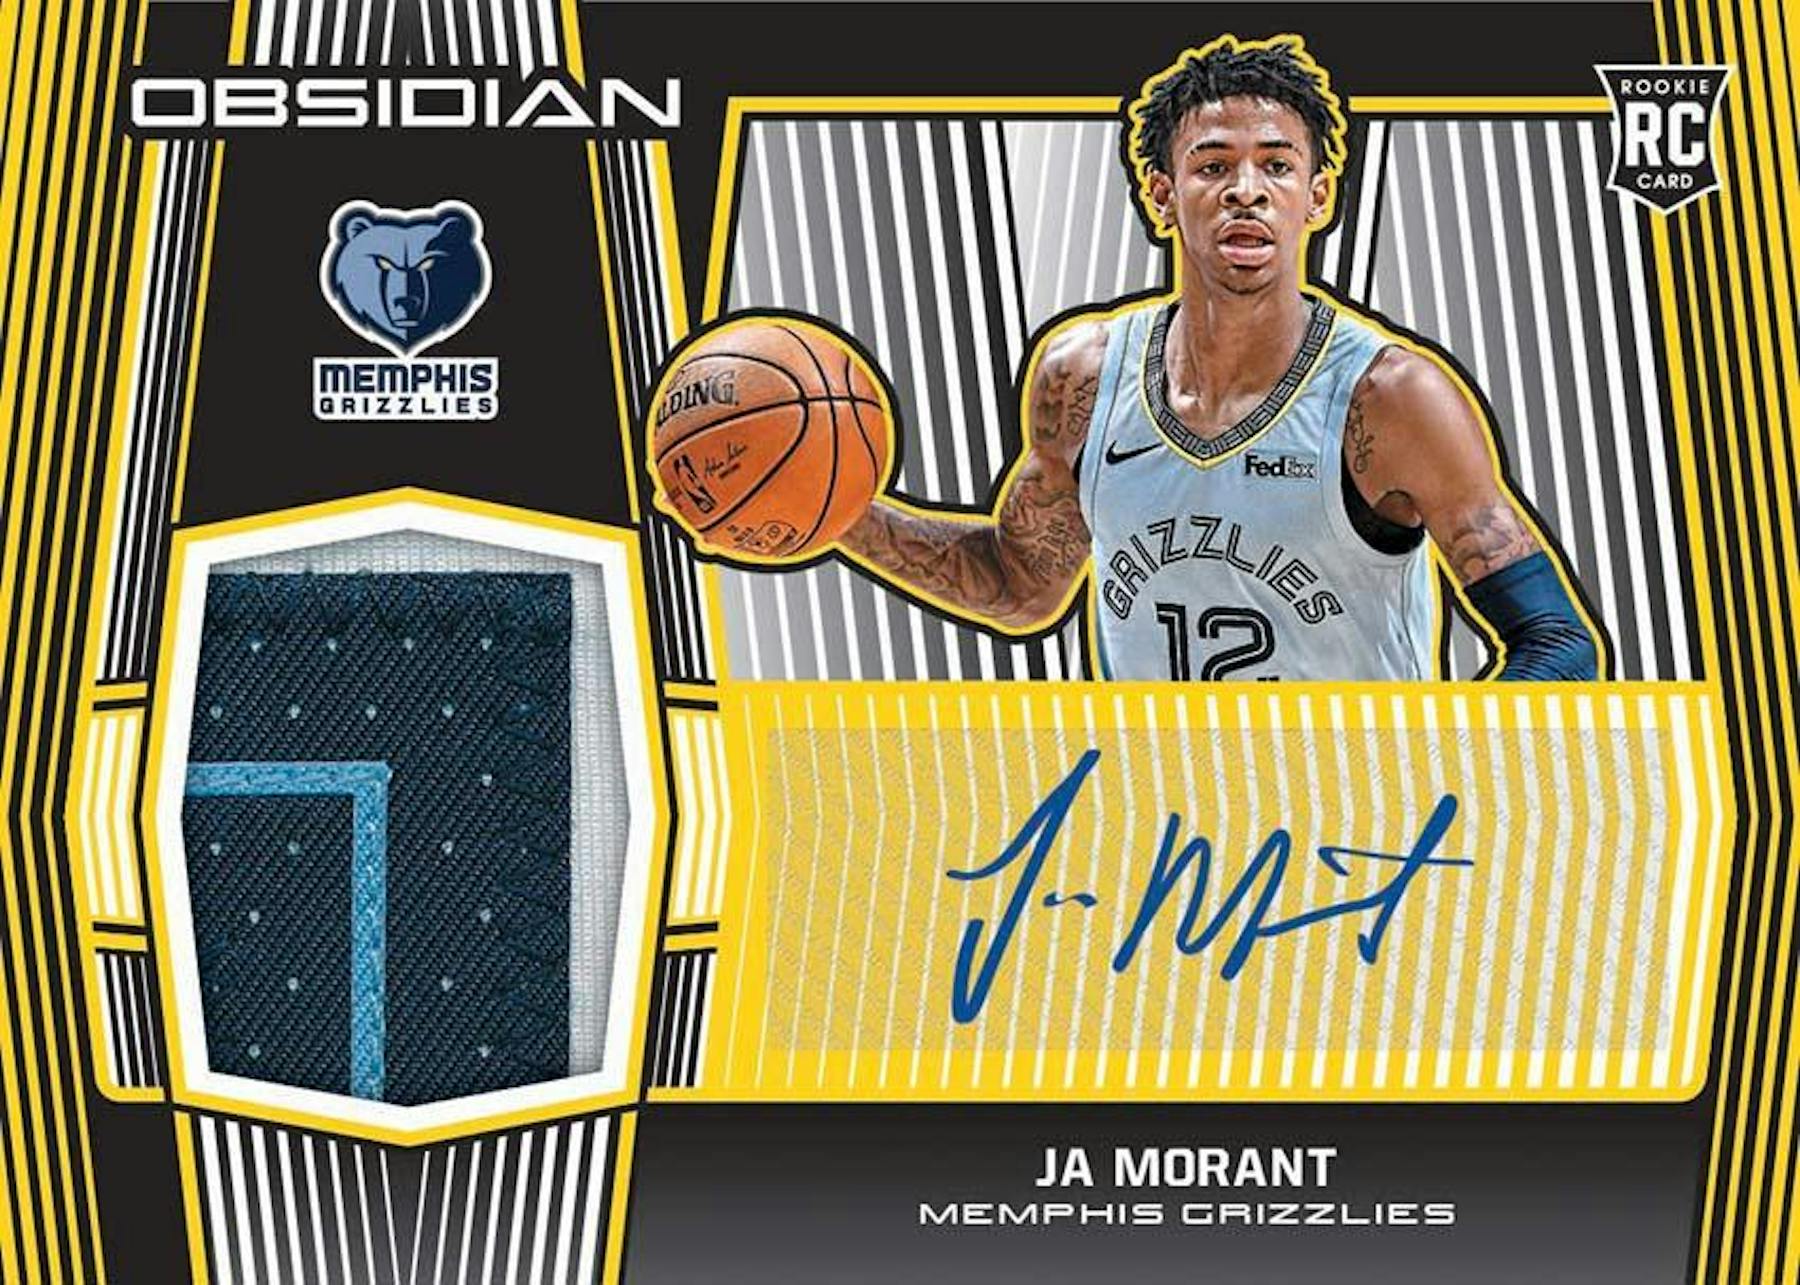 Ja Morant Basketball Cards Assorted (3) Bundle - Memphis Grizzlies Trading  Card Gift Pack